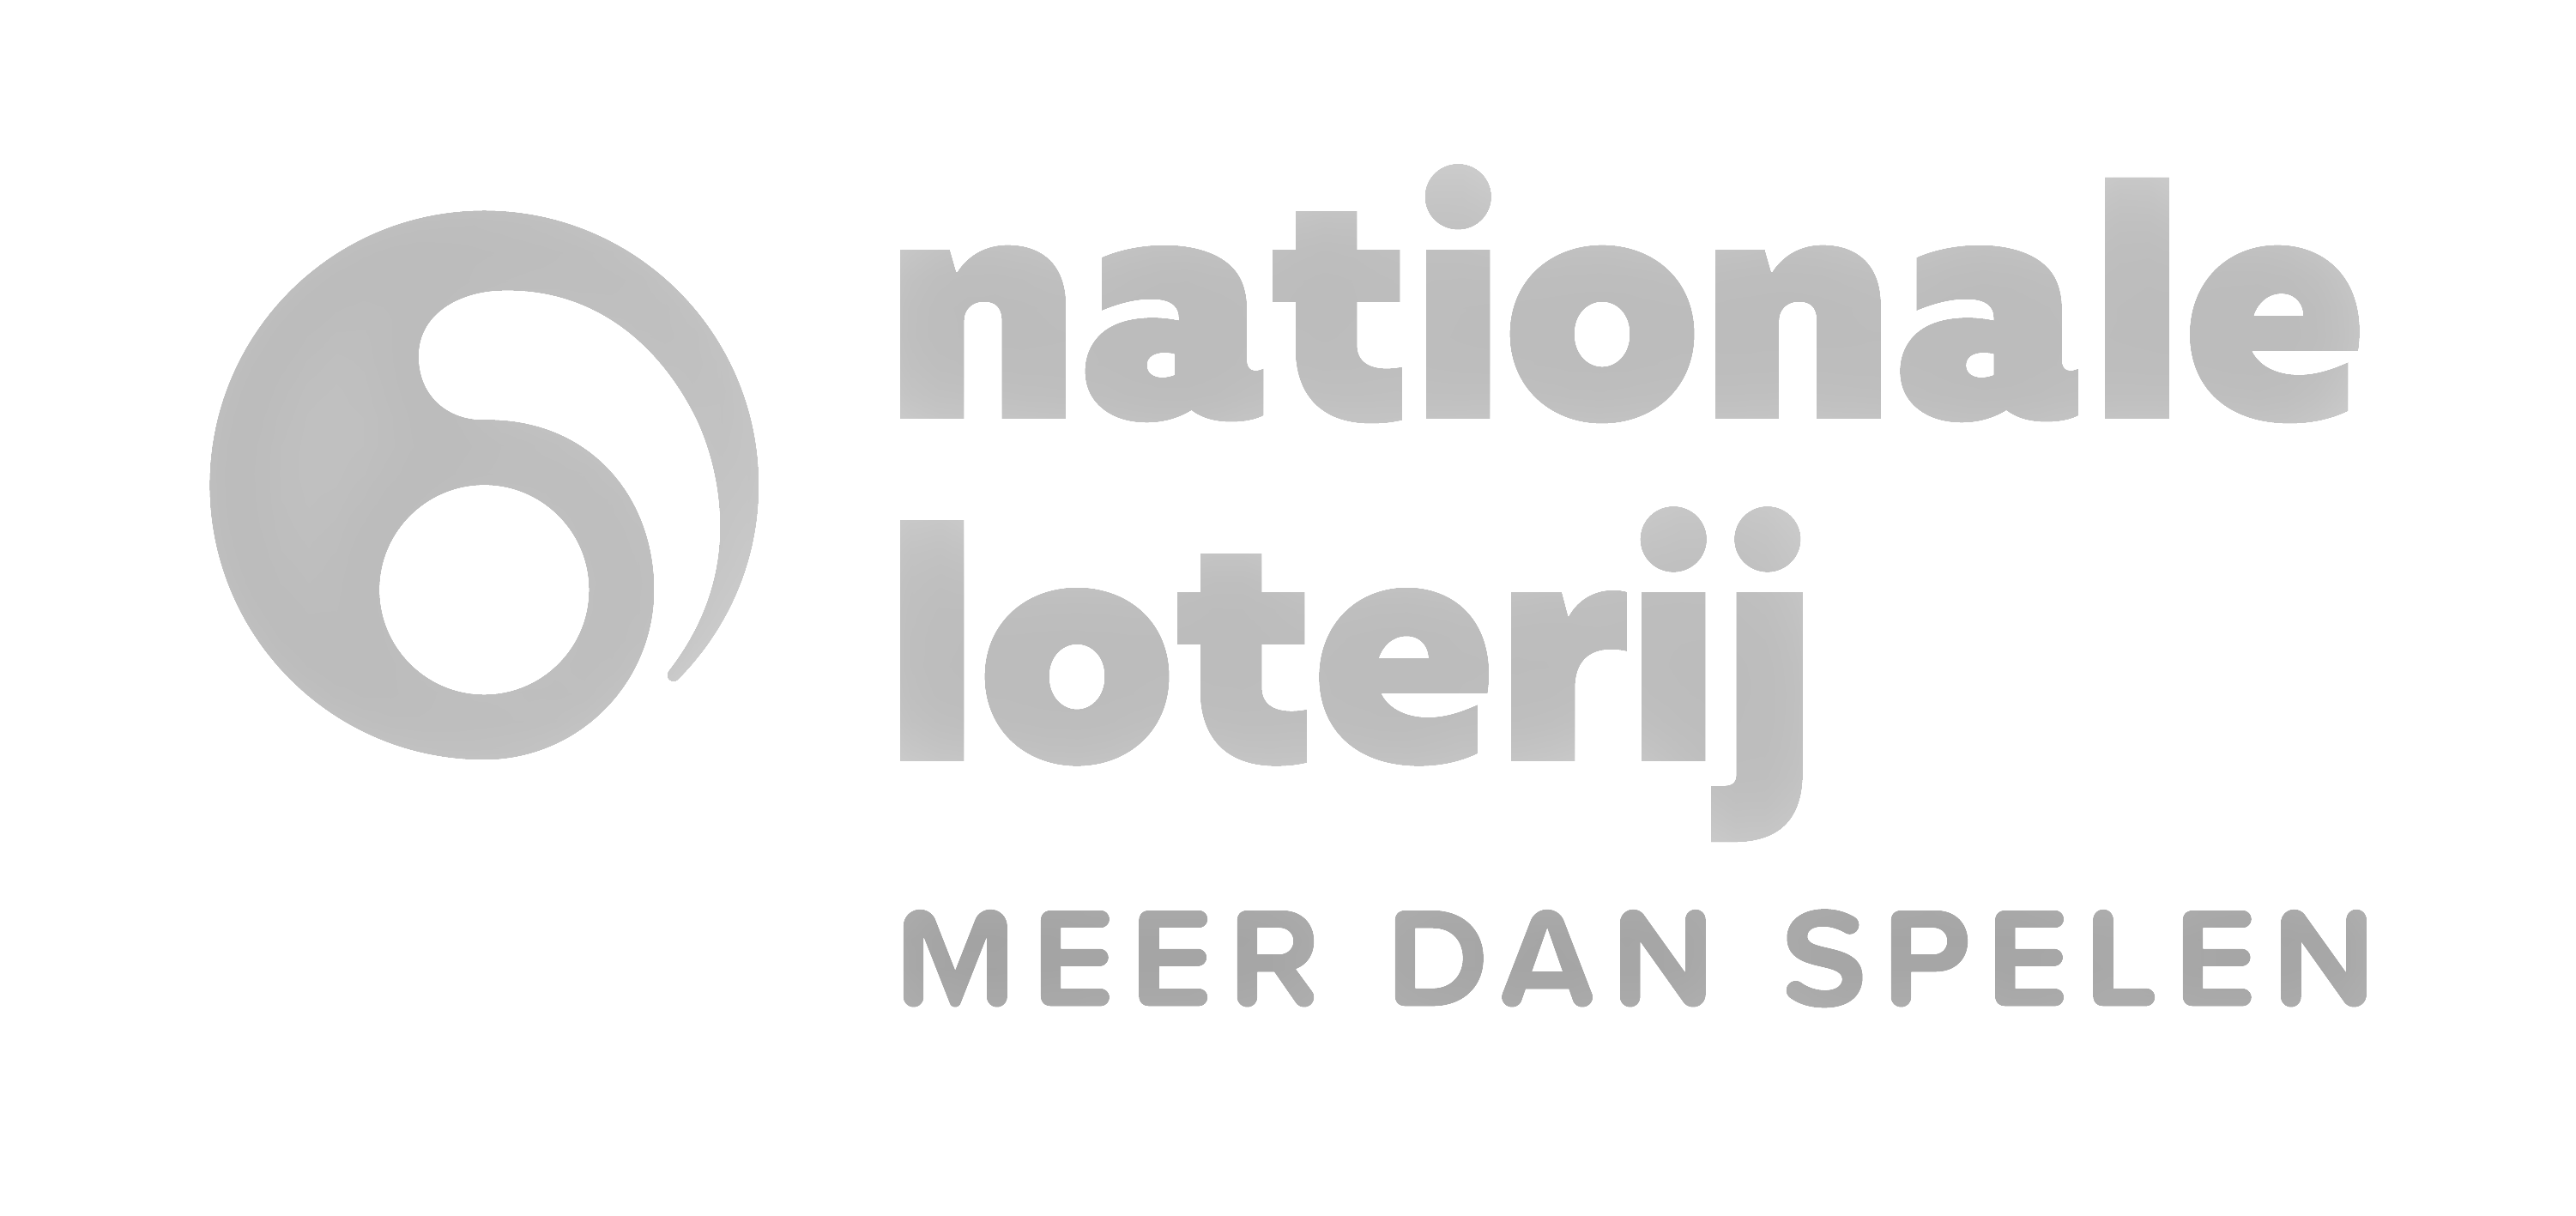 Loterie-nationale-explore-nl-white